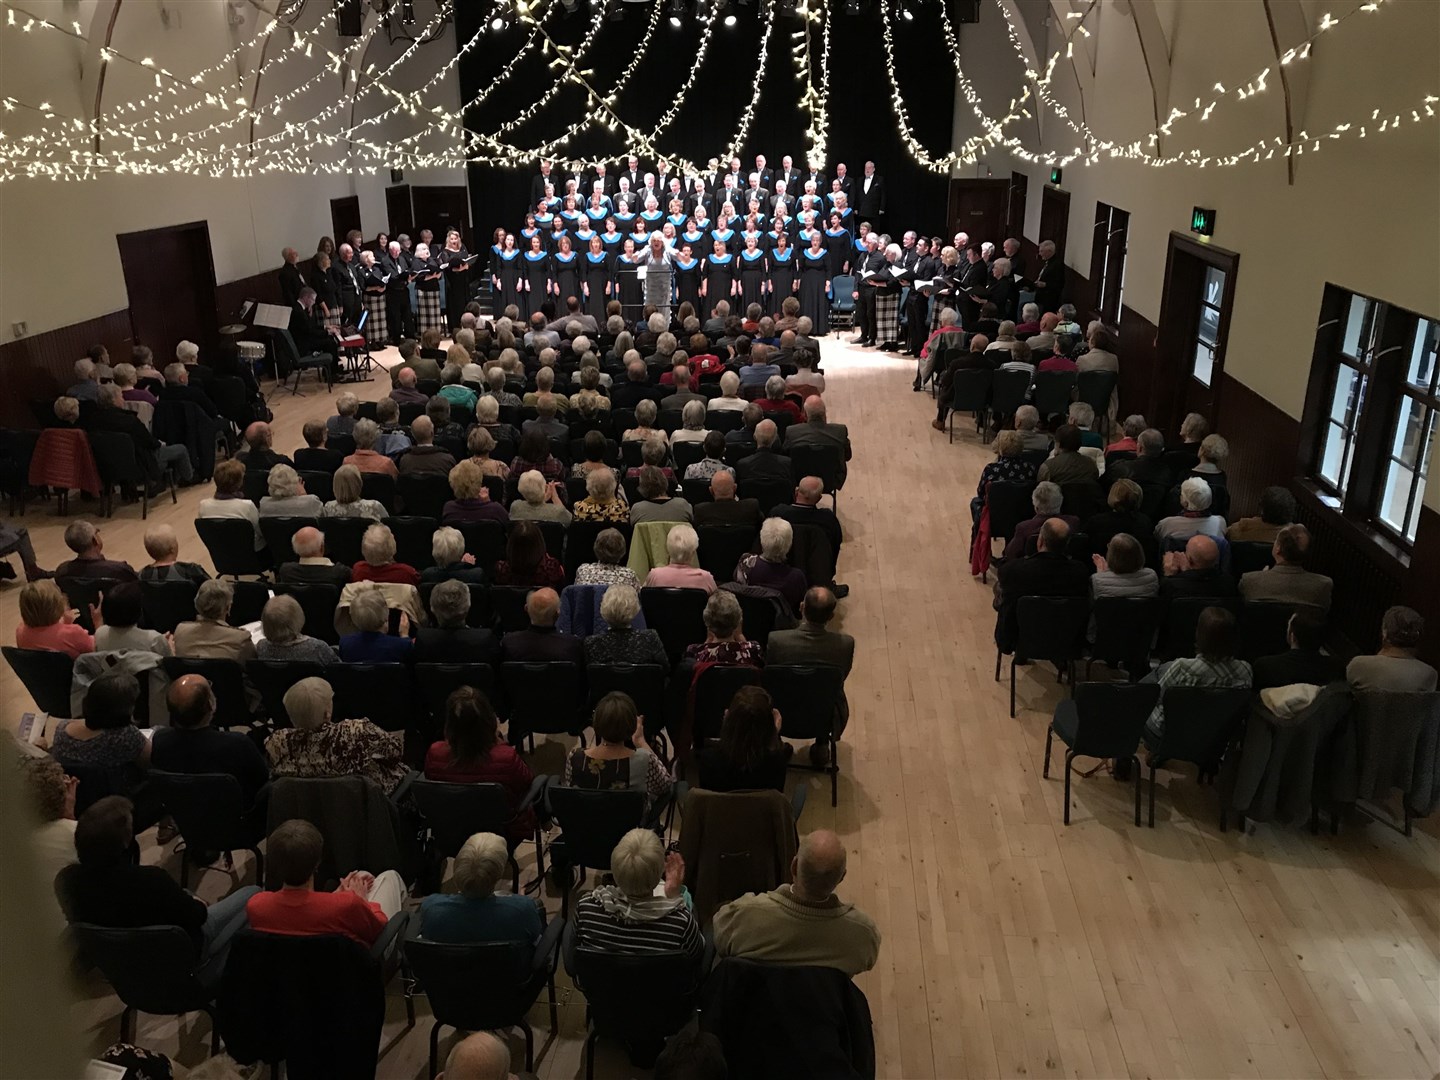 Glasgow Phoenix Choir perfoming at the Strathpeffer Pavillion back in 2018.